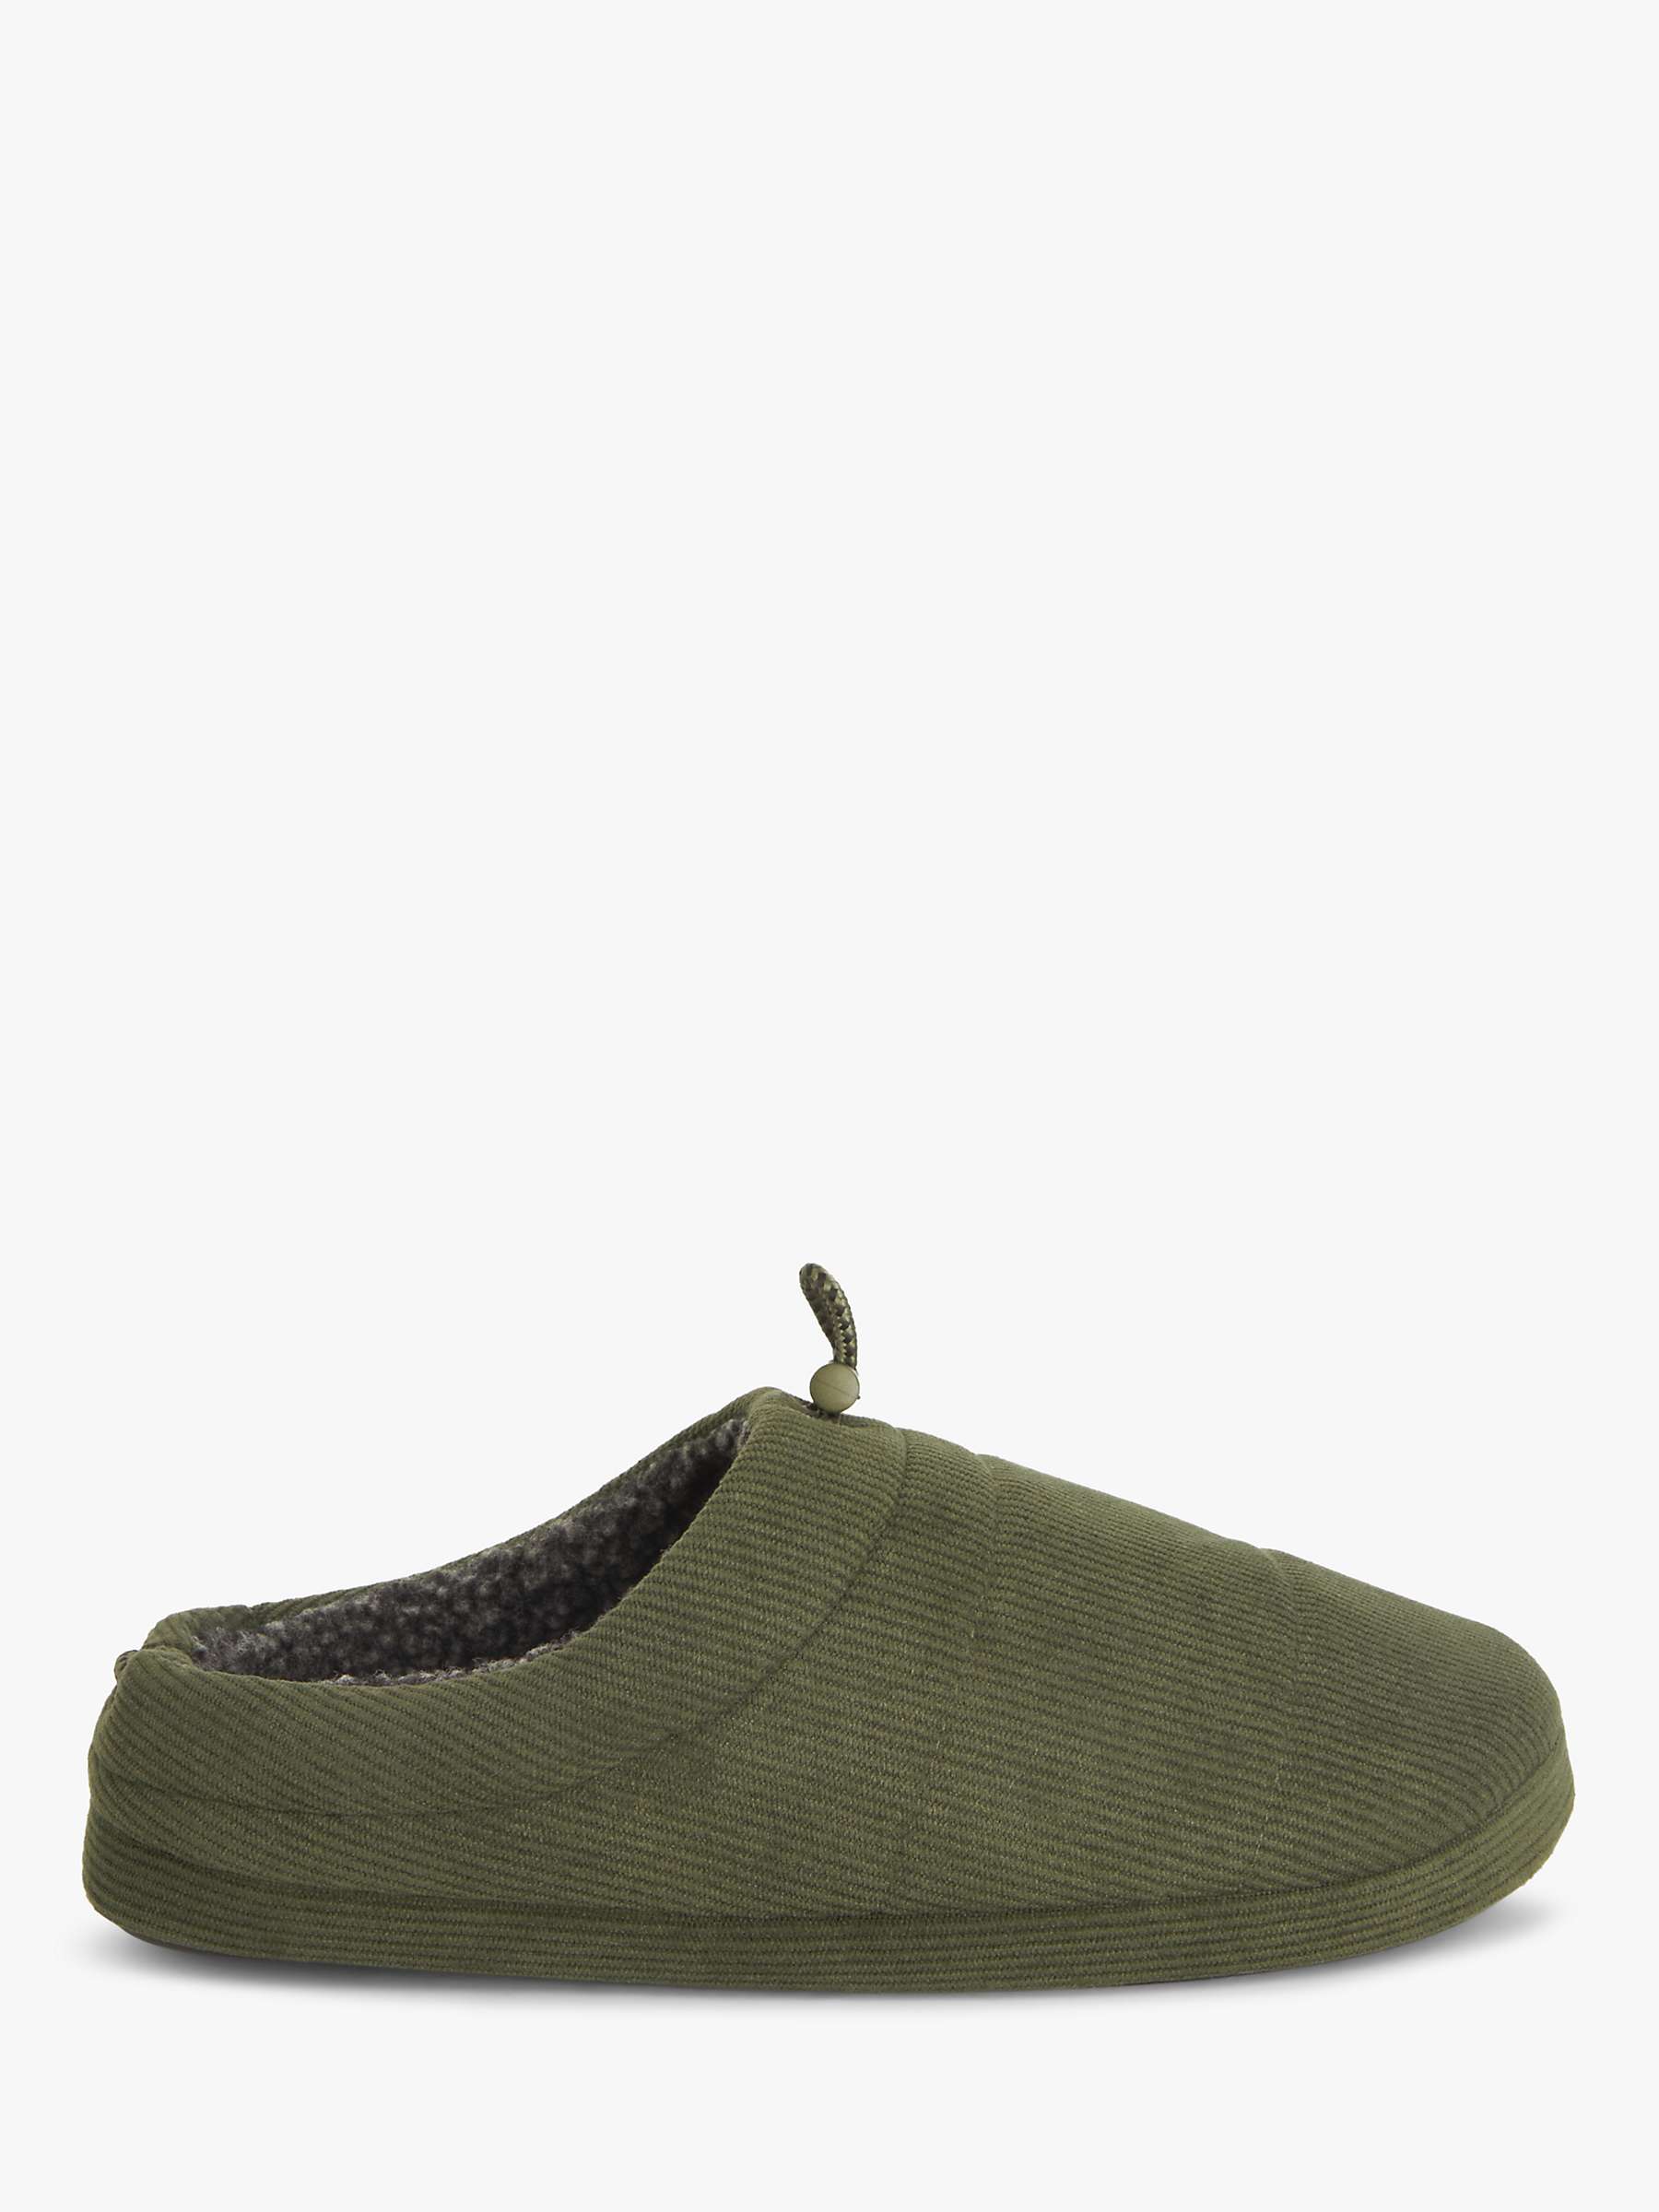 John Lewis ANYDAY Cord Mule Slippers, Green at John Lewis & Partners